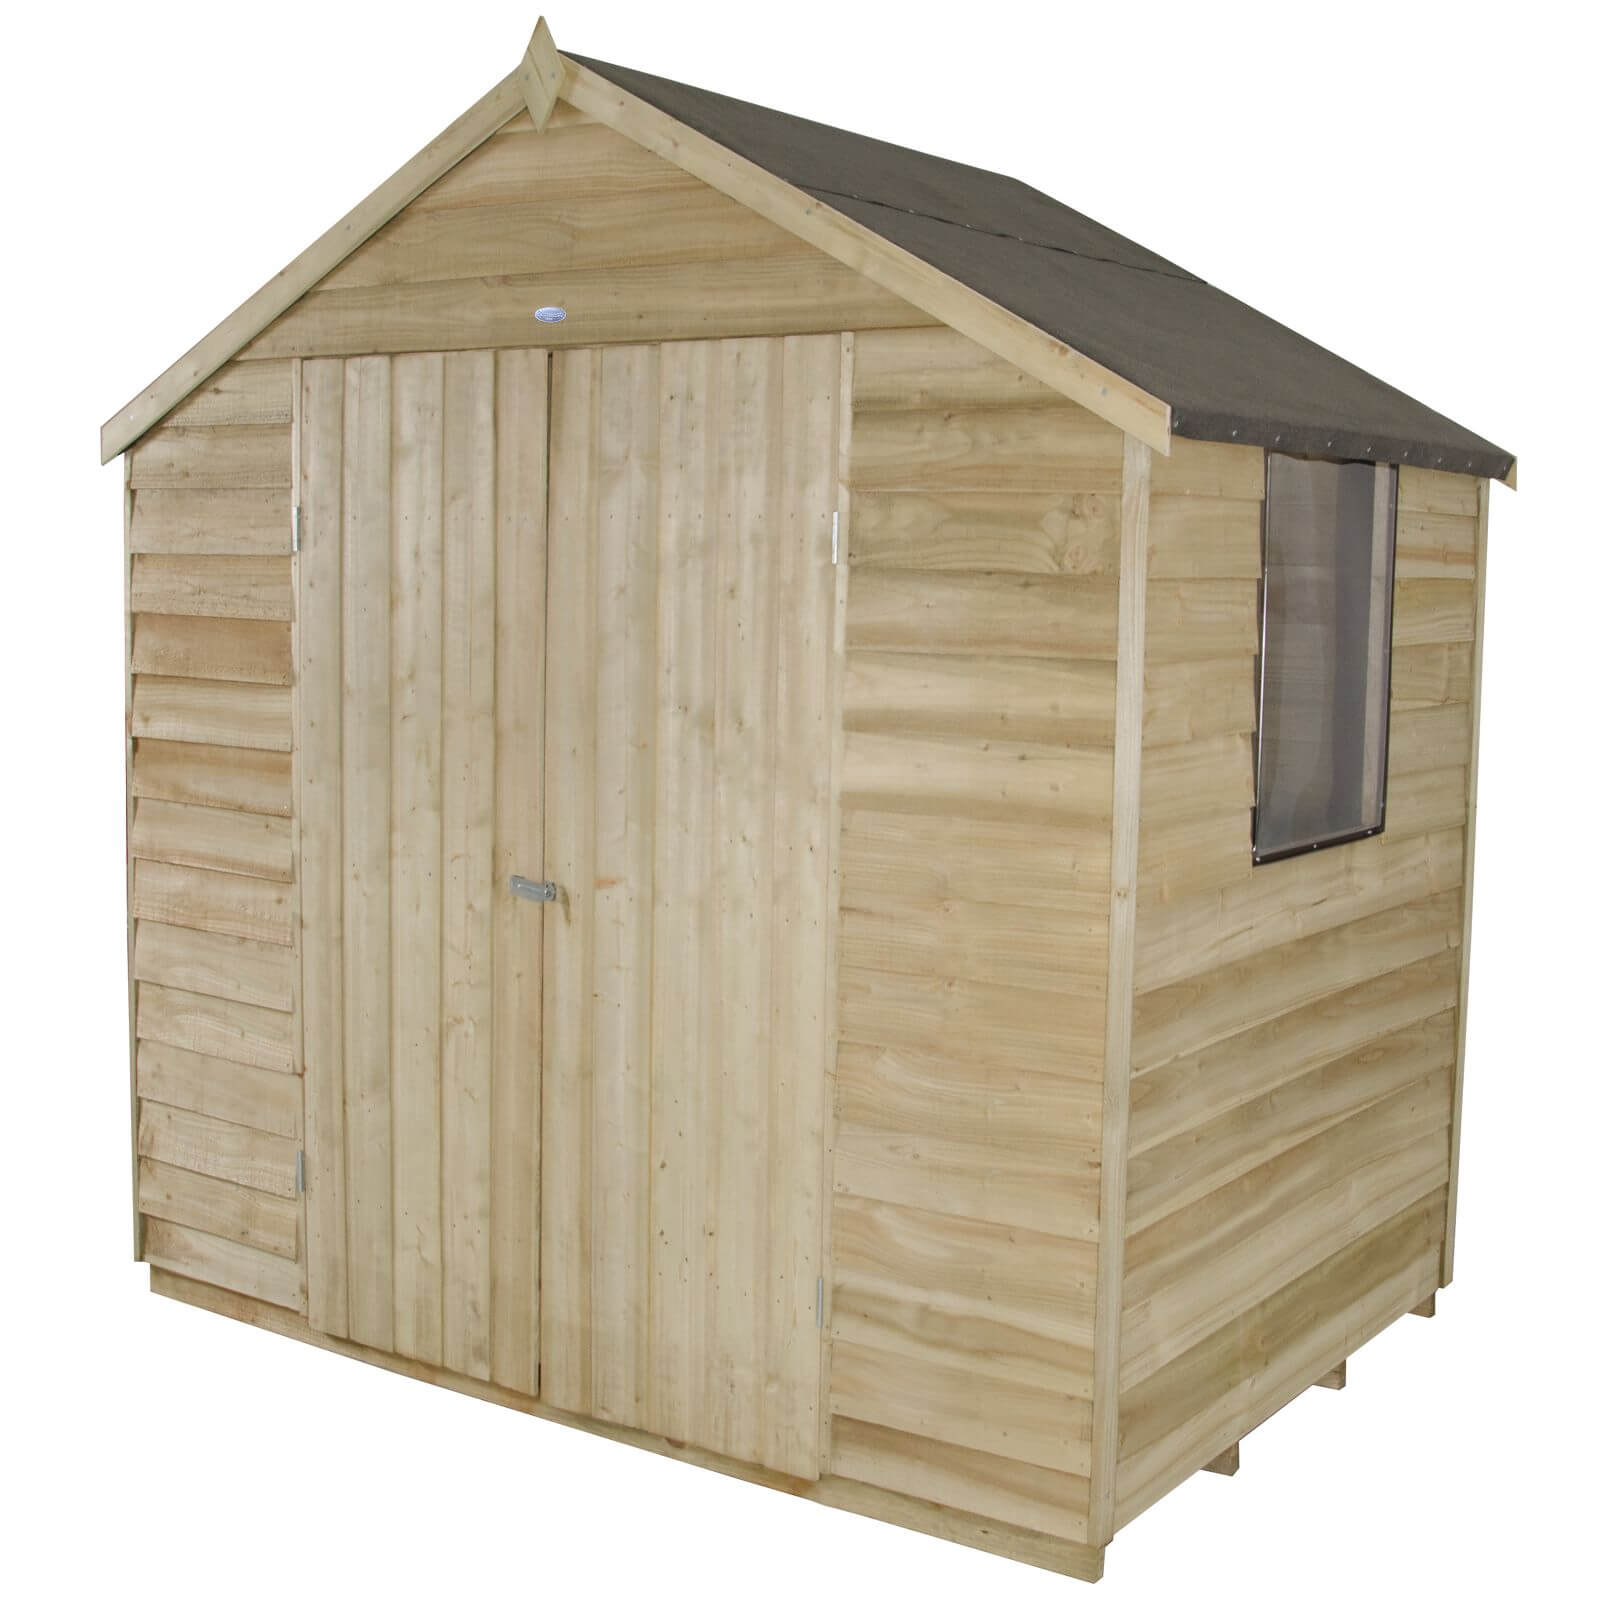 7x5ft Forest Natural Timber Overlap Apex Pressure Treated Wooden Shed